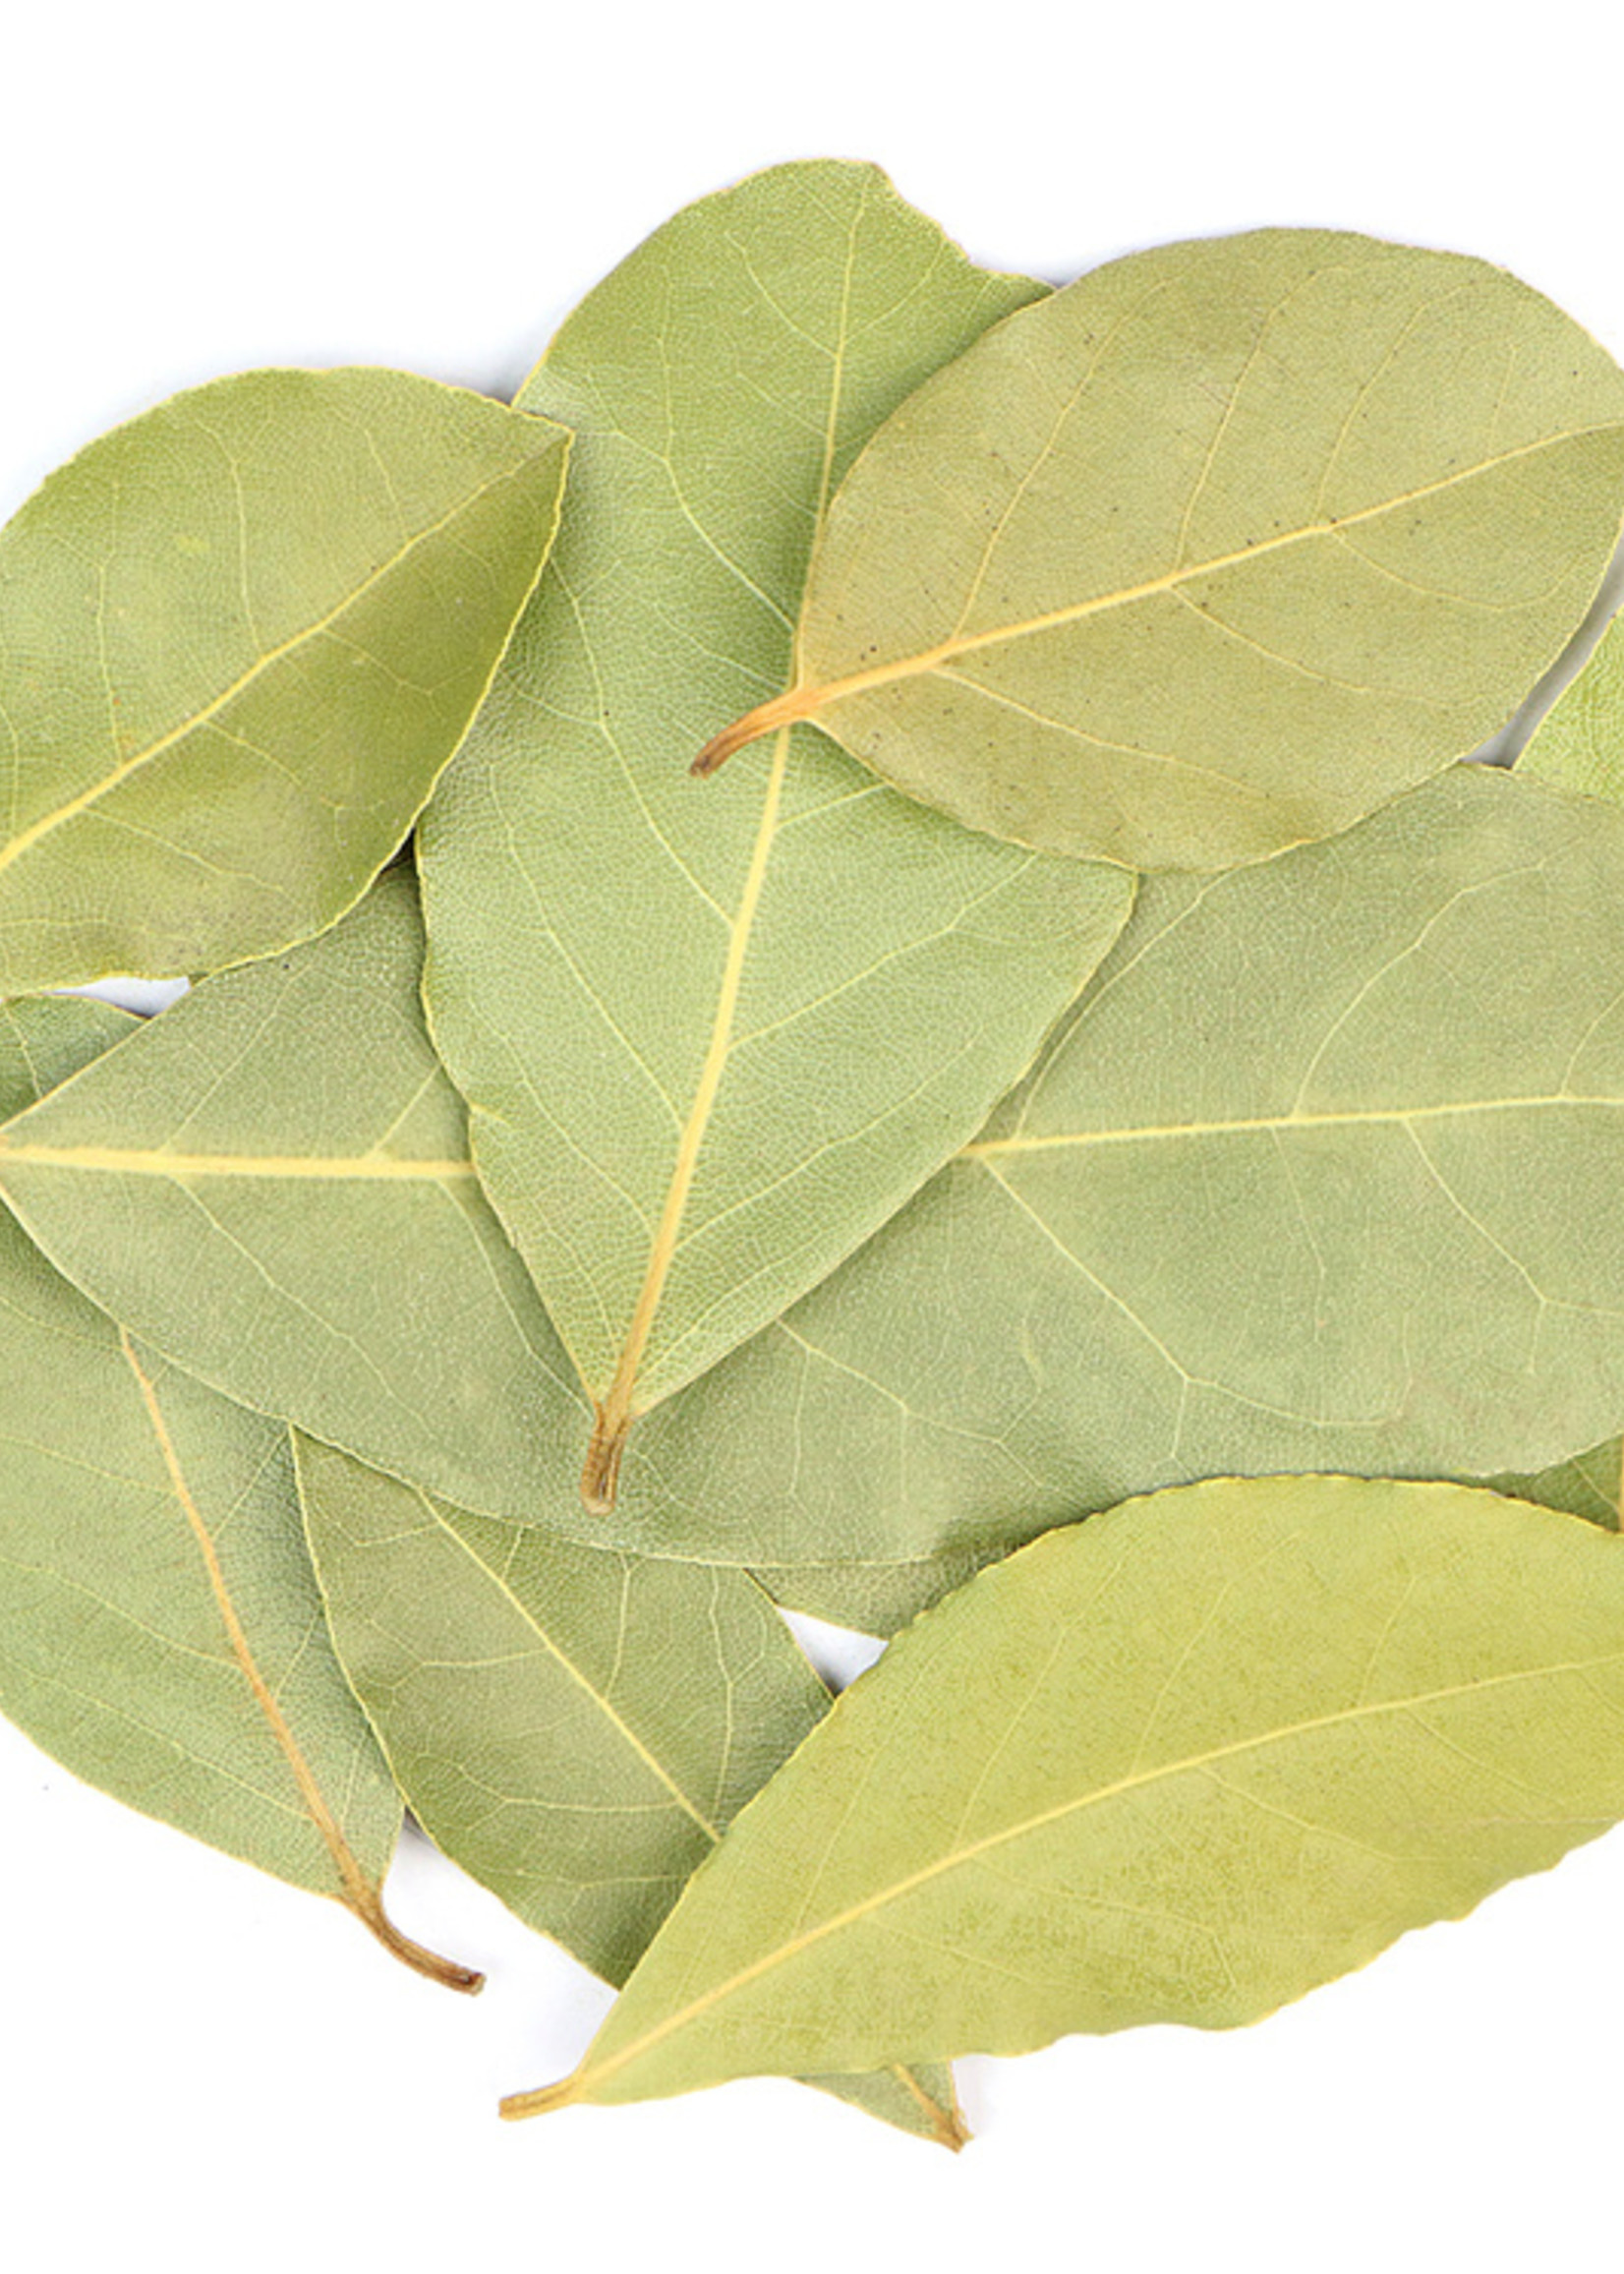 Bay leaves, Whole herb, Elsewhere apothecary, 1660x2320 HD Handy